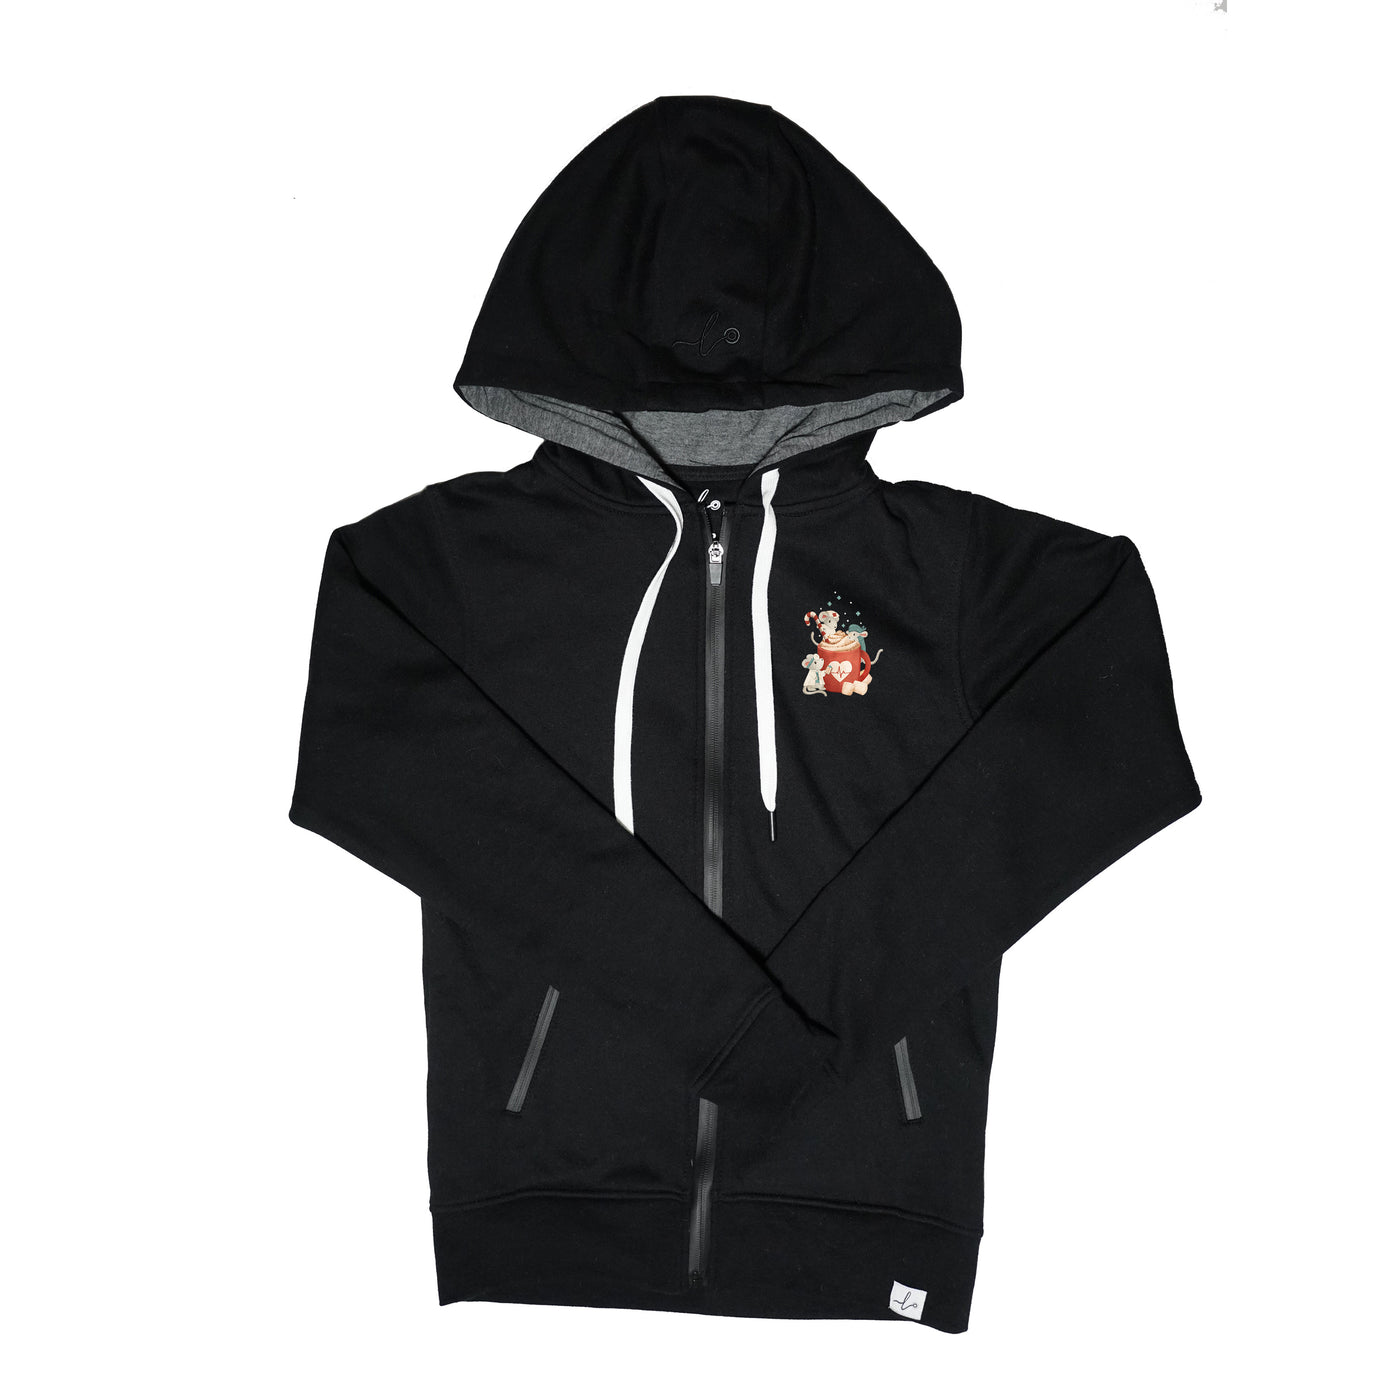 Rx Cocoa - PRN Lux Hoodie